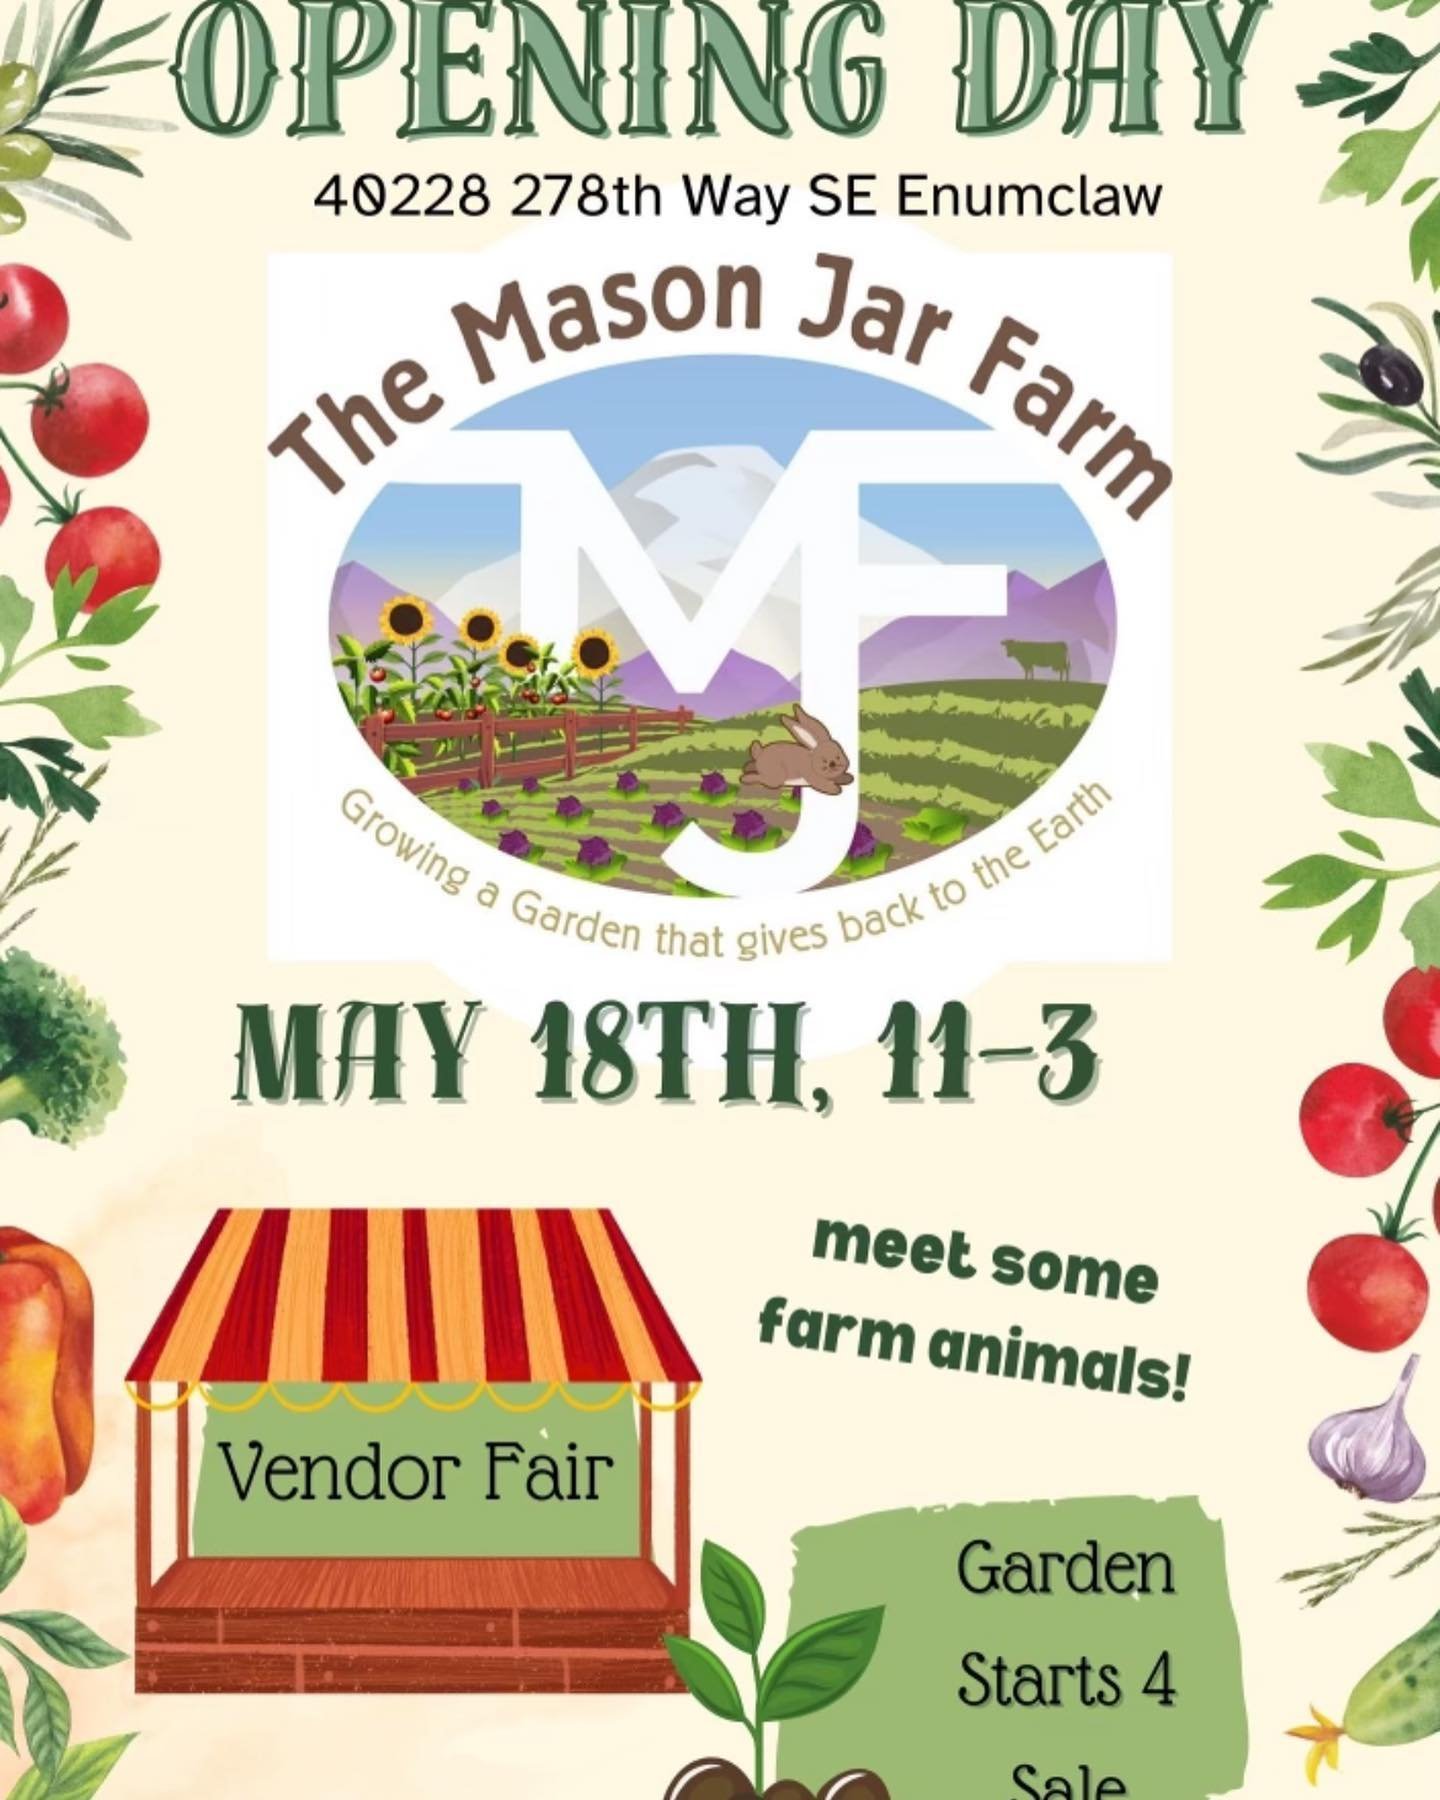 Join us at The Mason Jar Farm in Enumclaw May 18th. Opening Day Vendor Fair will be from 11:00am-3:00pm. If you are curious about our Enumclaw schools, now is the time to come ask us questions, get your garden starts and get your child&rsquo;s face p